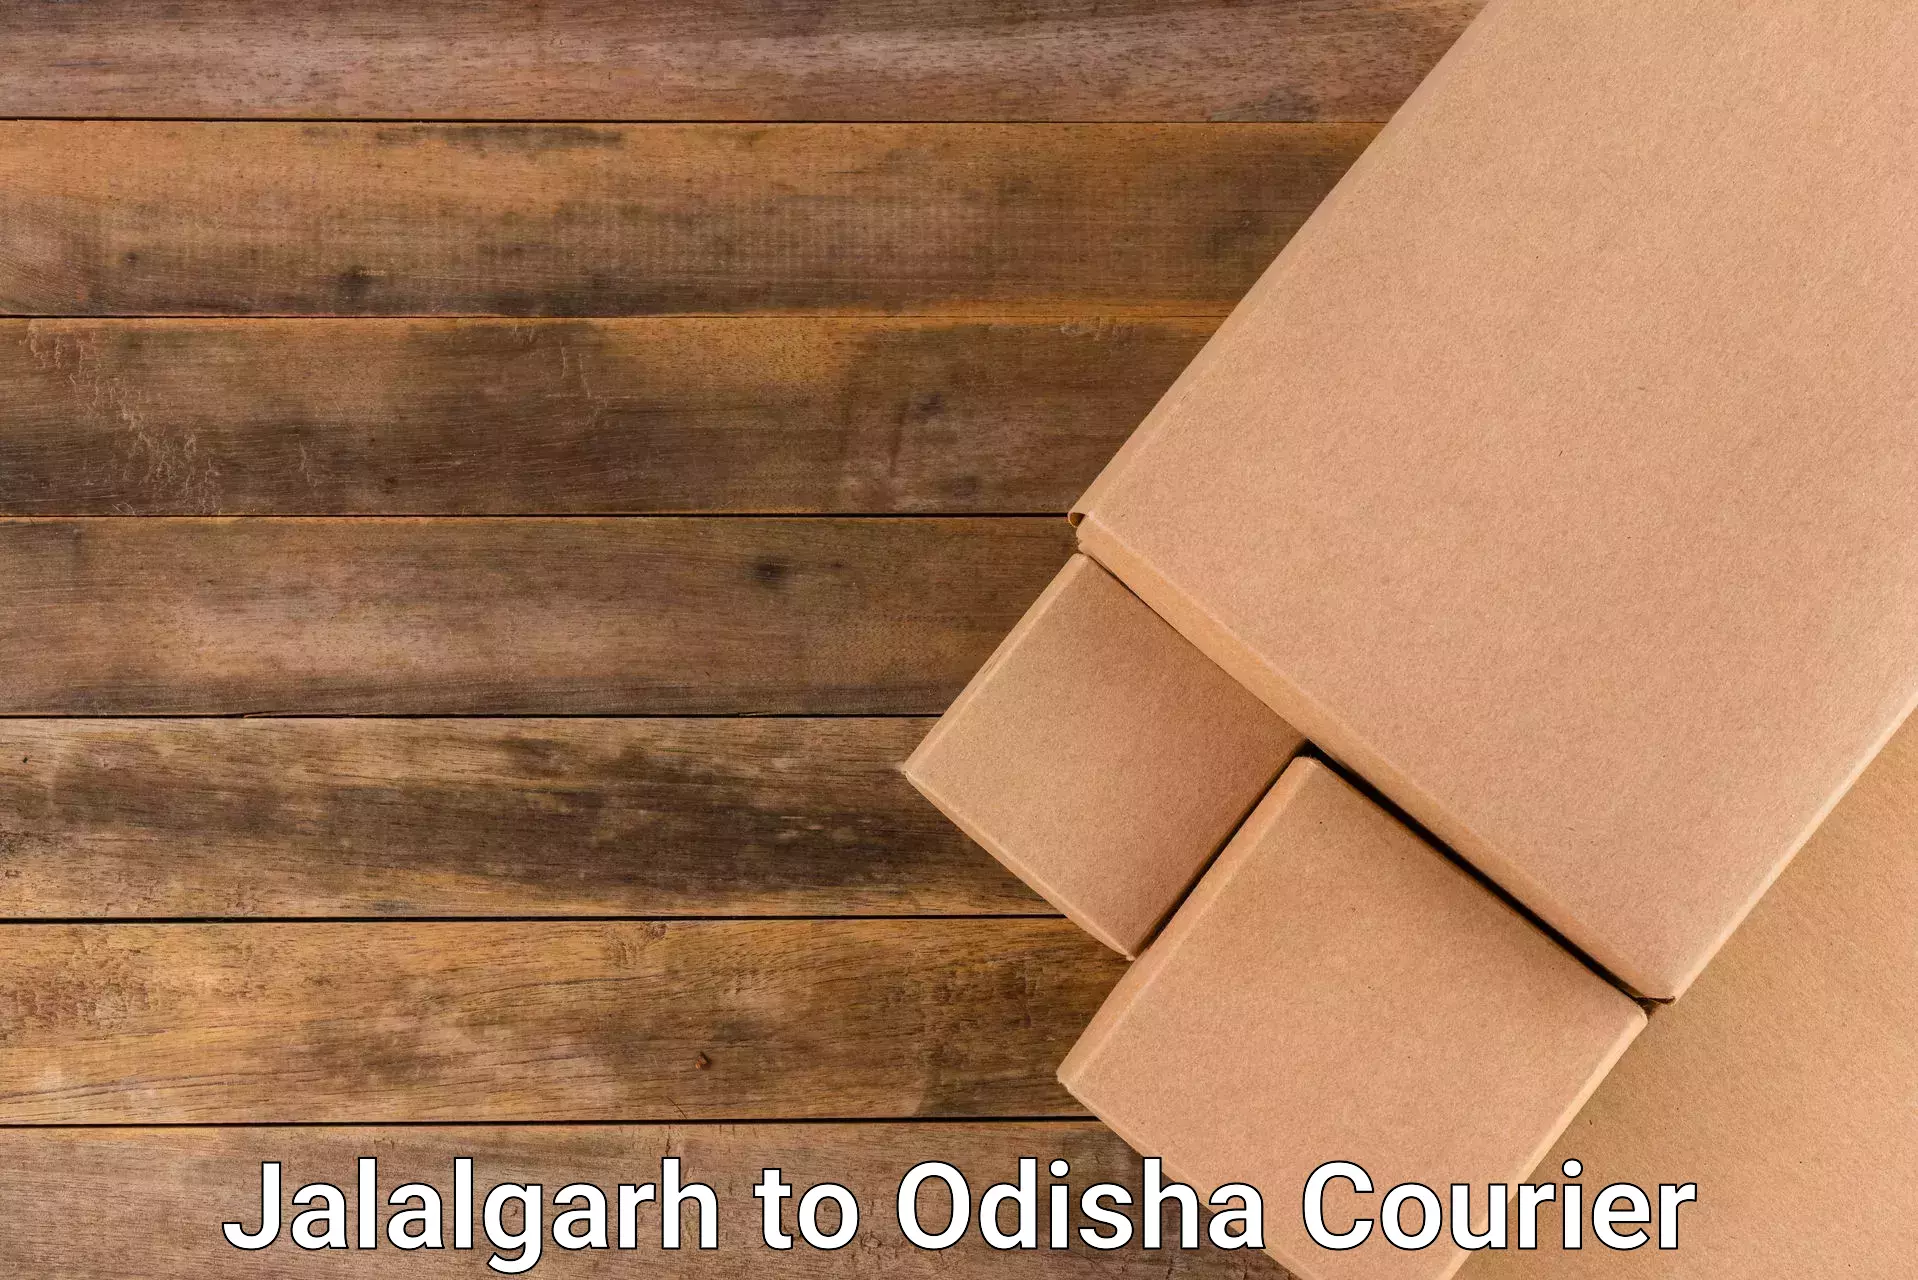 High-quality delivery services in Jalalgarh to Udala